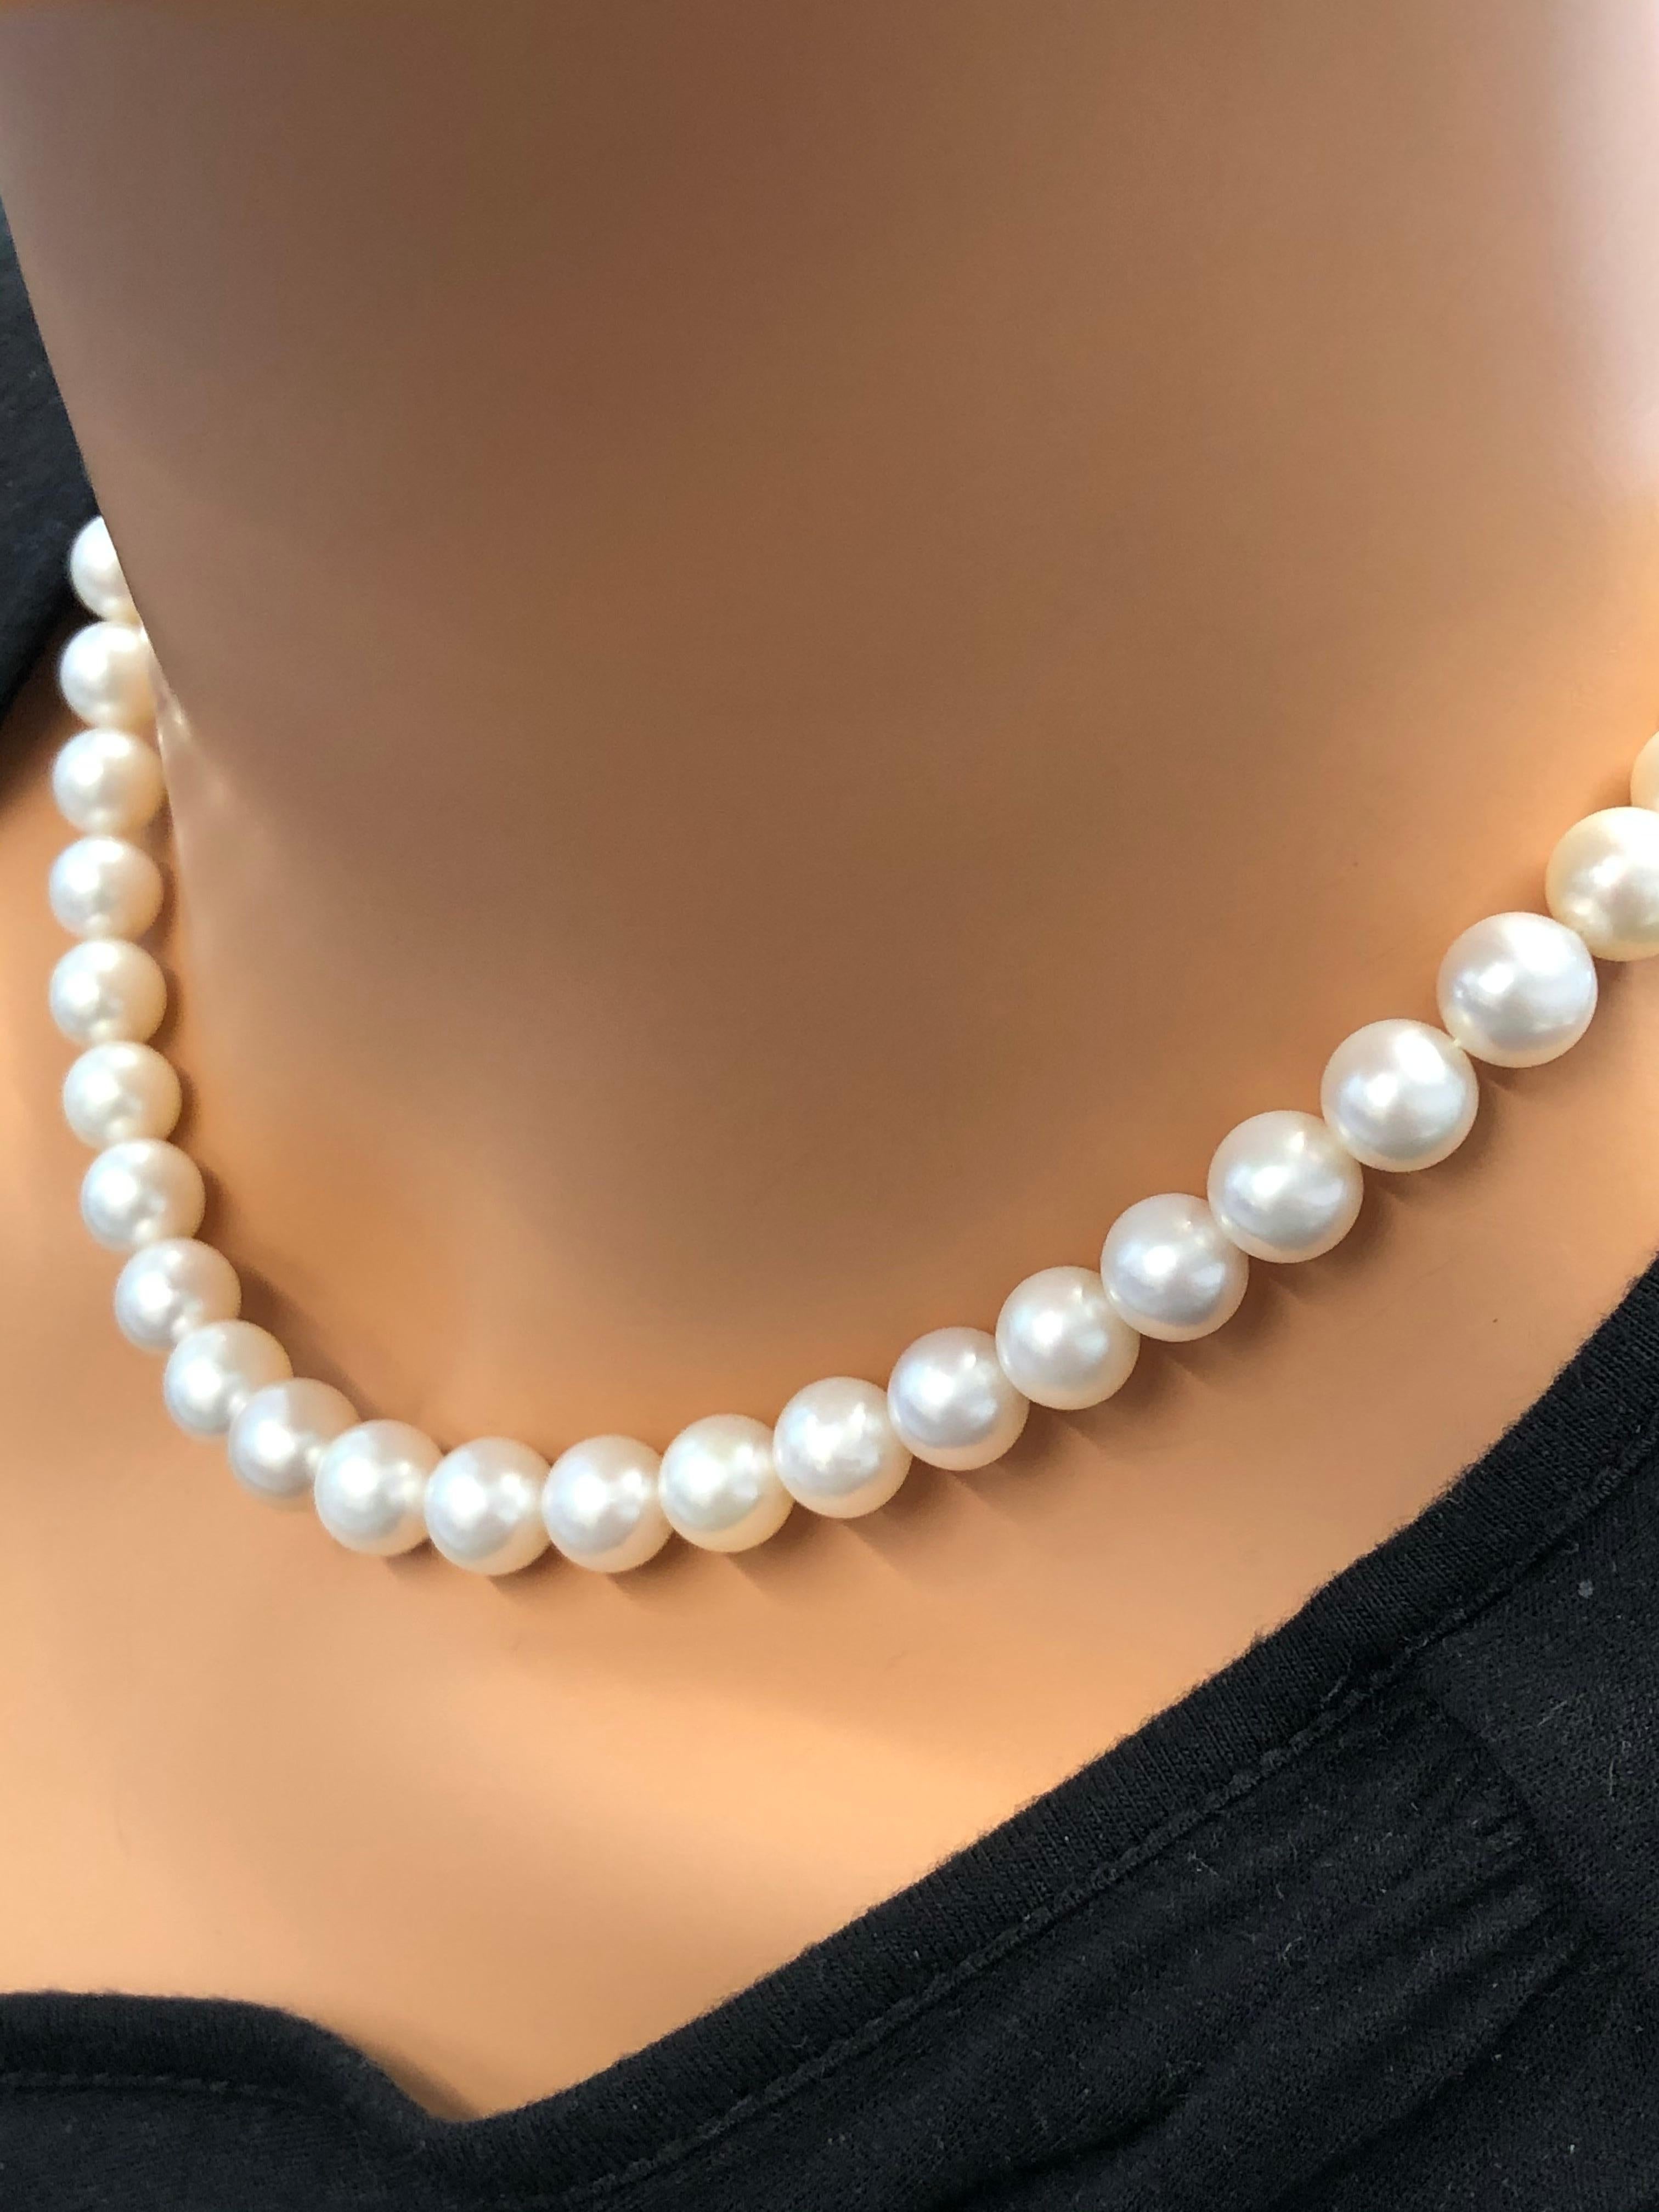 This classic pearl strand necklace is the ultimate statement in luxury with its seamless elegance. A total of 45 cultured white South Sea pearls are expertly strung on a single strand, matched evenly in color throughout. A silver filigree clasp adds